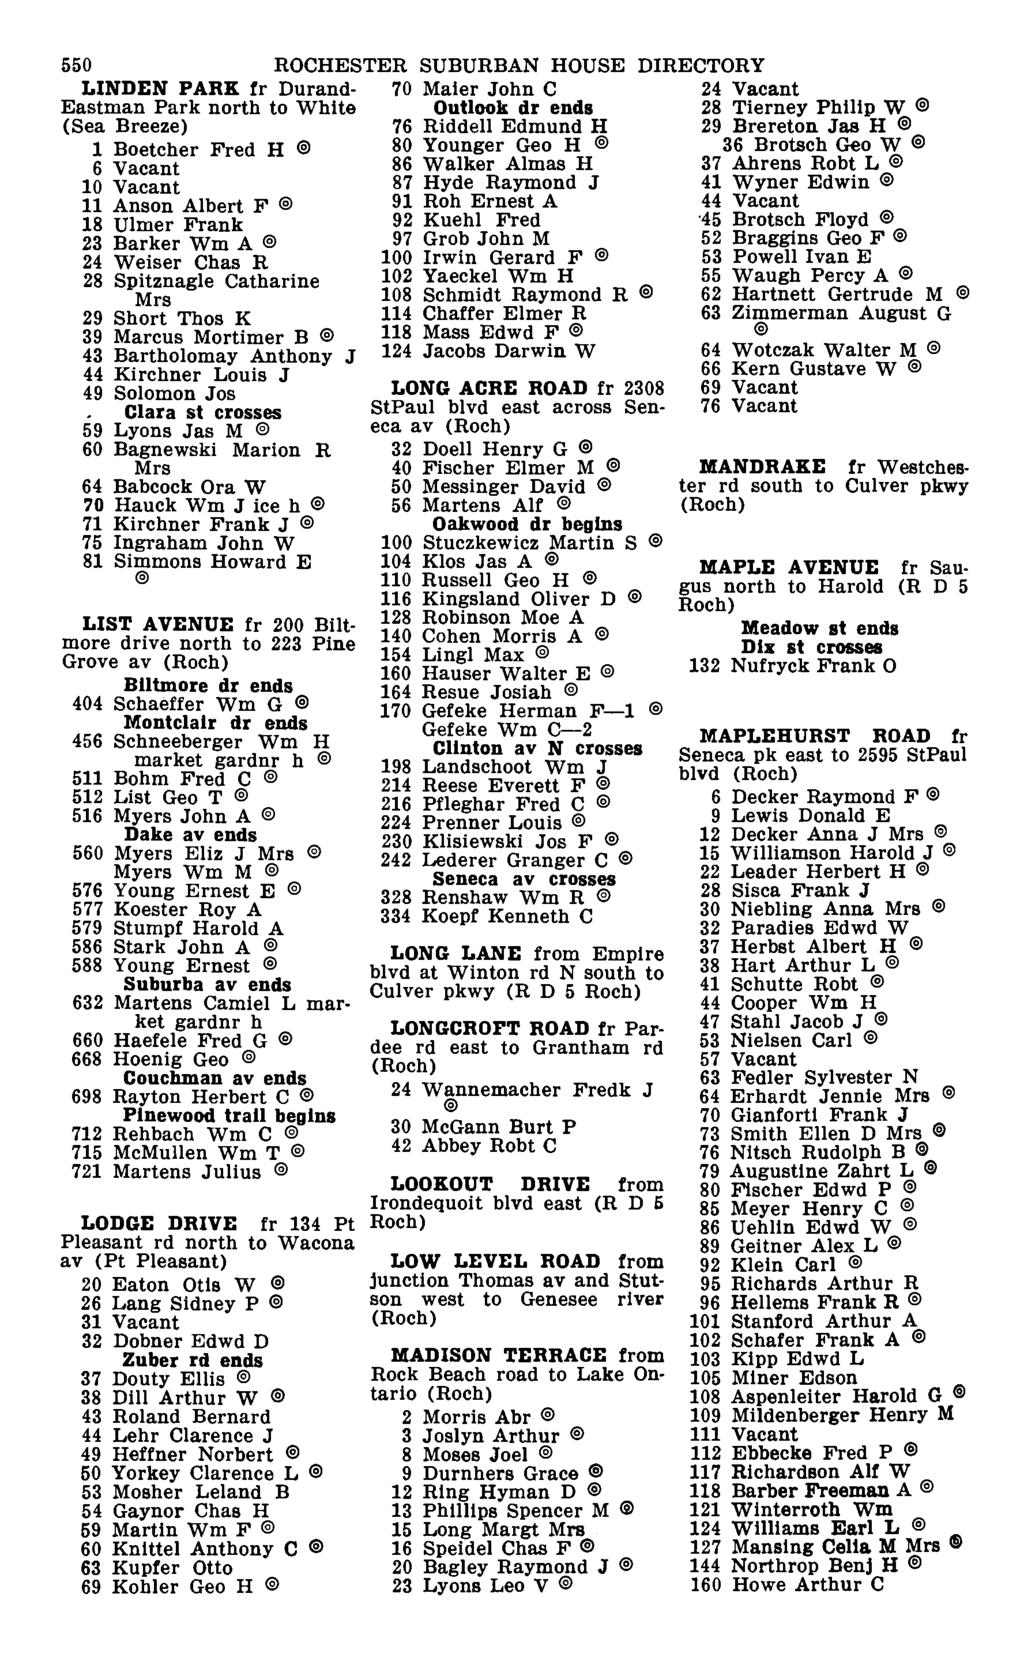 550 ROCHESTER SUBURBAN HOUSE DIRECTORY LINDEN PARK fr Durand- Eastman Park north to White (Sea Breeze) 1 Boetcher Fred H 6 Vacant 10 Vacant 11 Anson Albert F 18 Ulmer Frank 23 Barker Wm A 24 Weiser